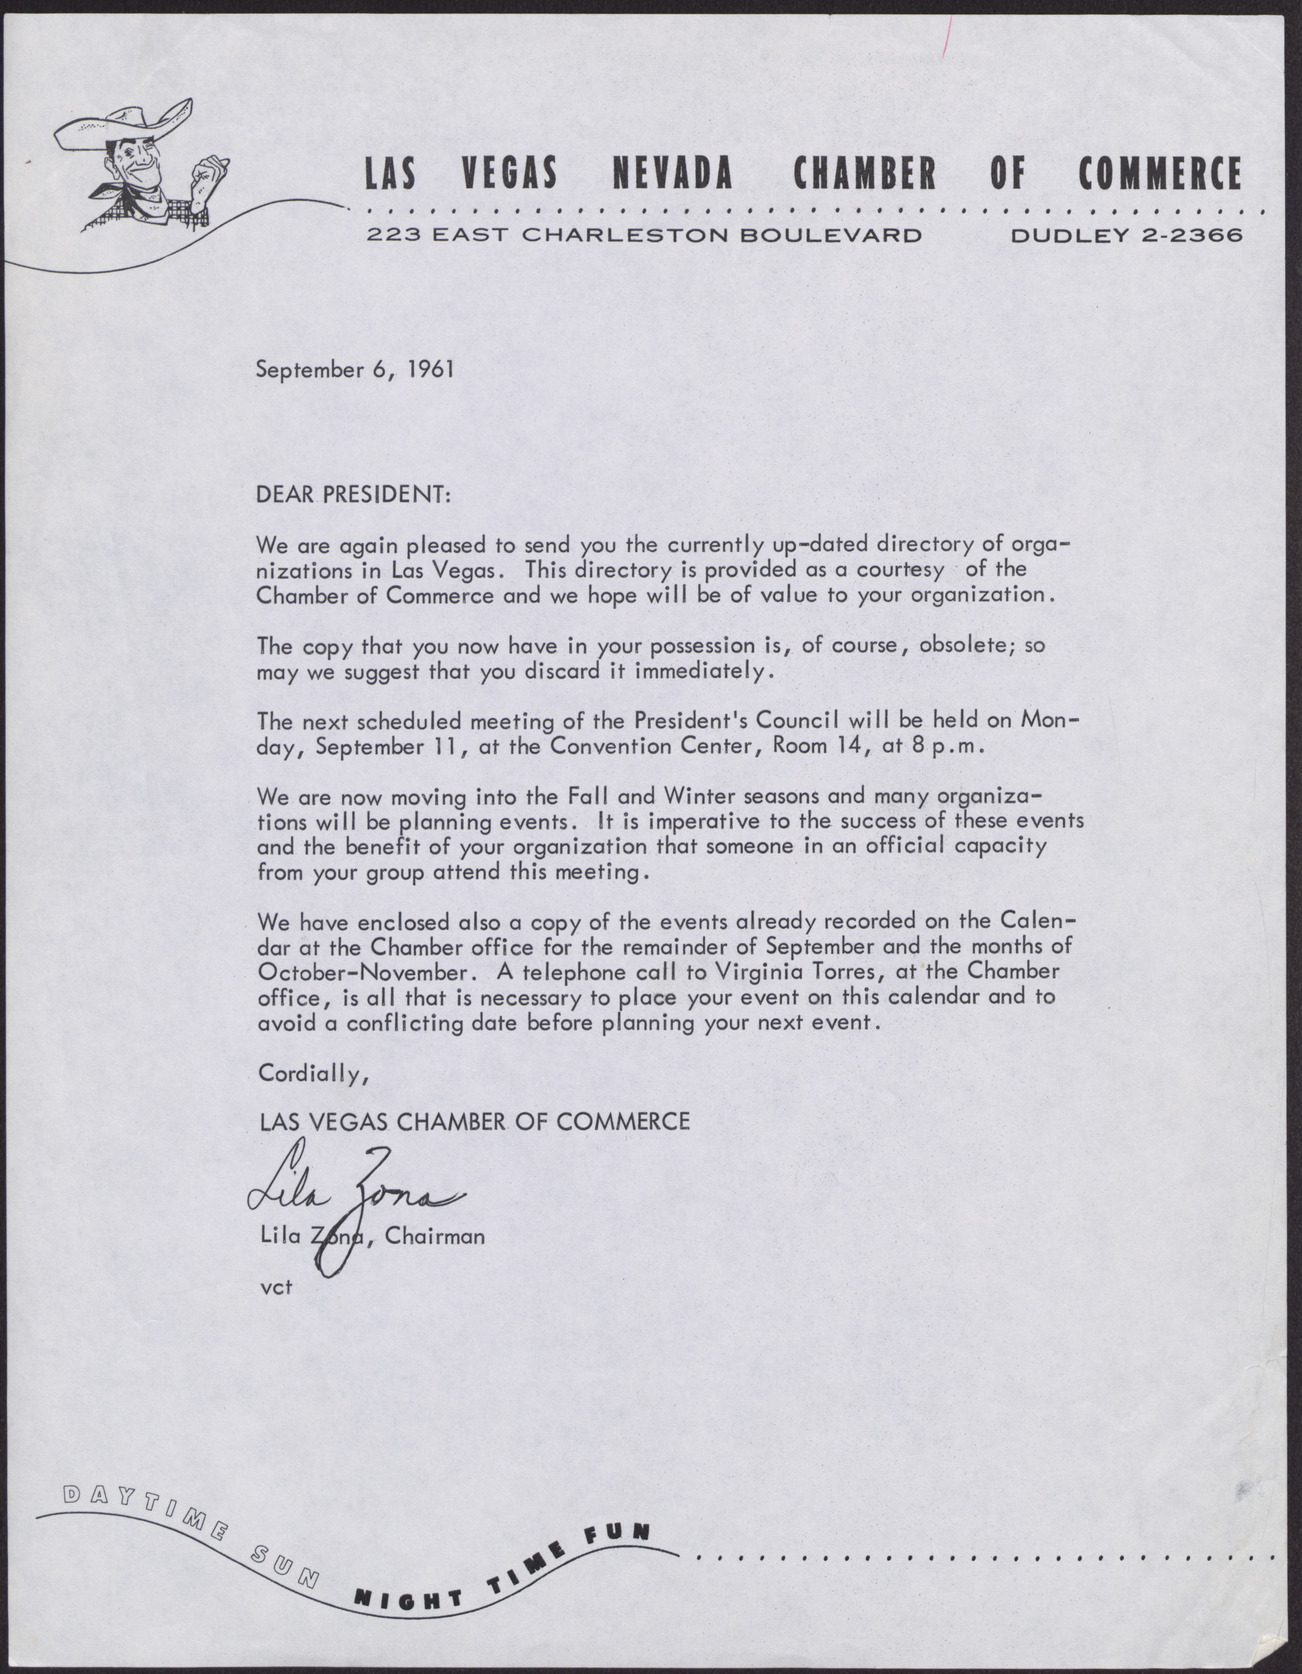 Letter to unnamed president of an organization from the Las Vegas Nevada Chamber of Commerce, September 6, 1961